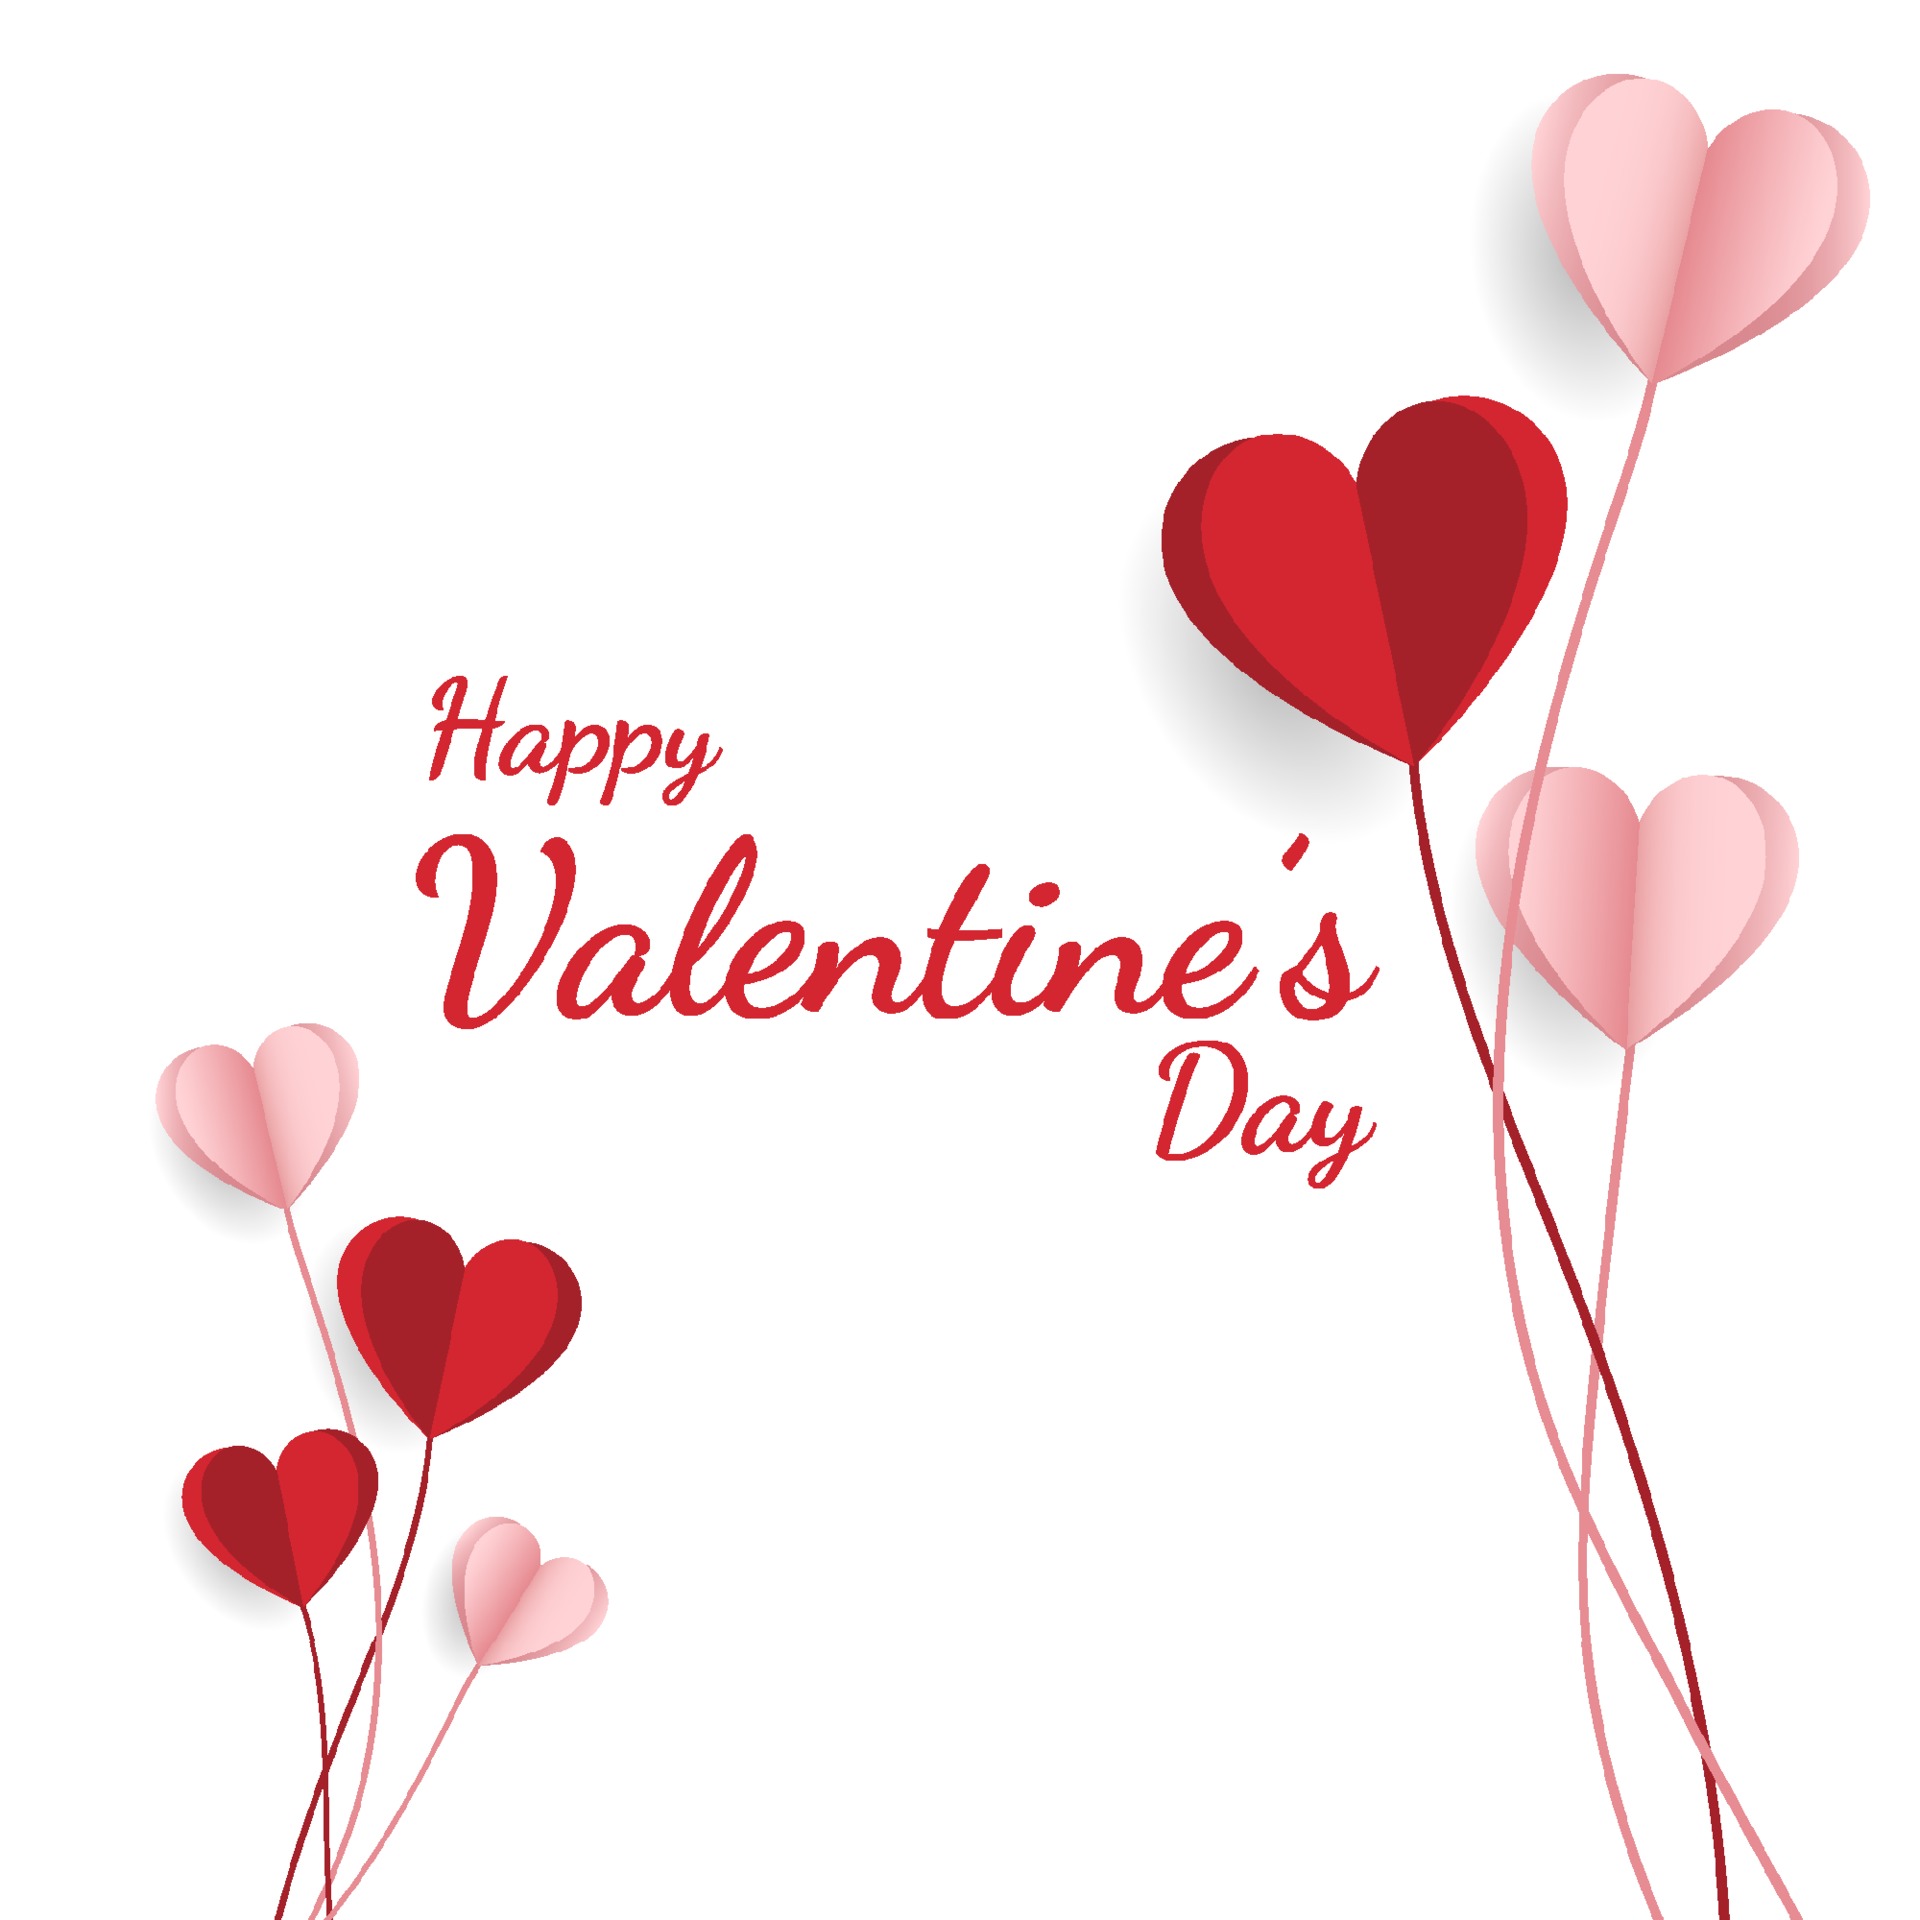 Aesthetic Valentines Day Clipart Graphic by Markicha Art